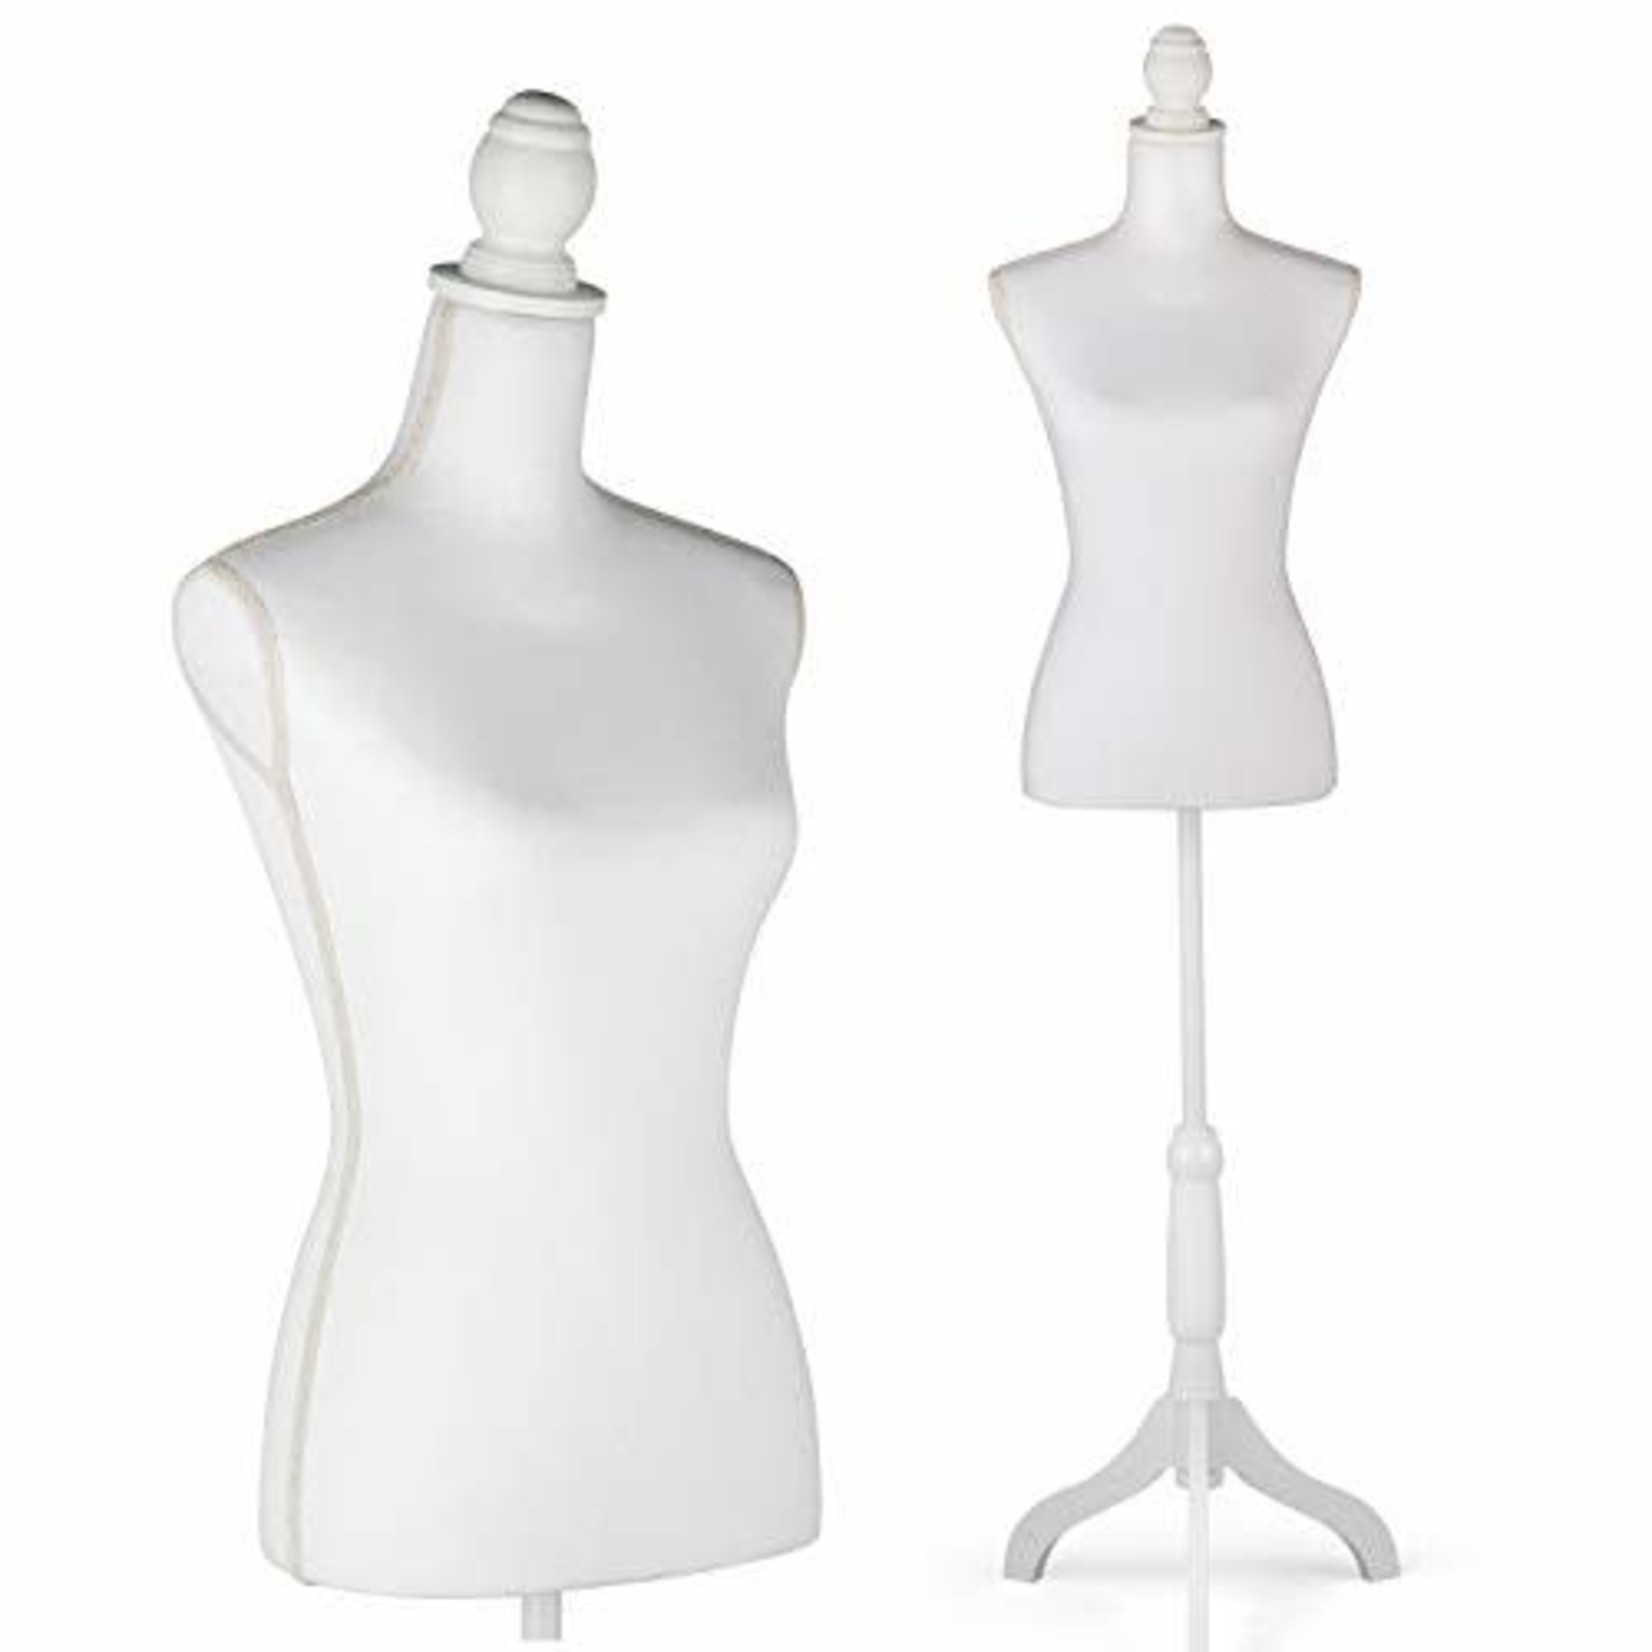 Hynawin Mannequin Body with Tripod Stand for Clothing Dress Jewelry Display, White